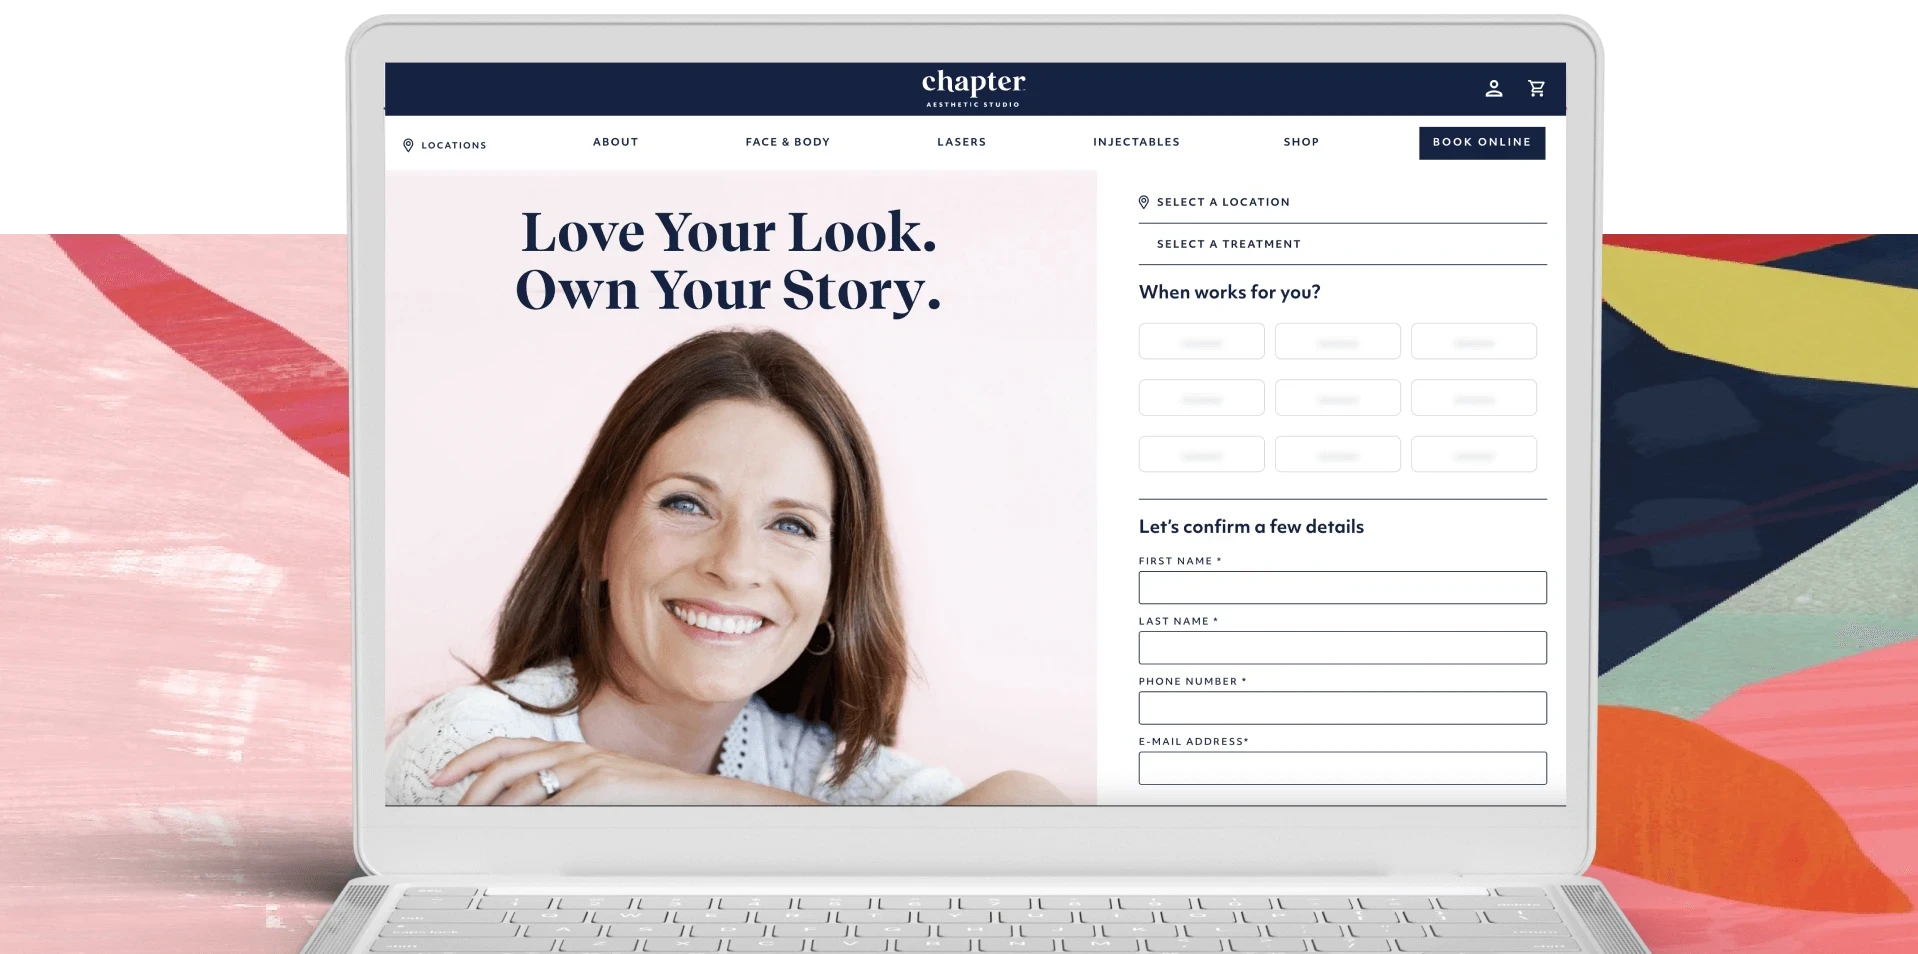 An open laptop screen shows the appointment page of the Chapter Aesthetic Studio website.